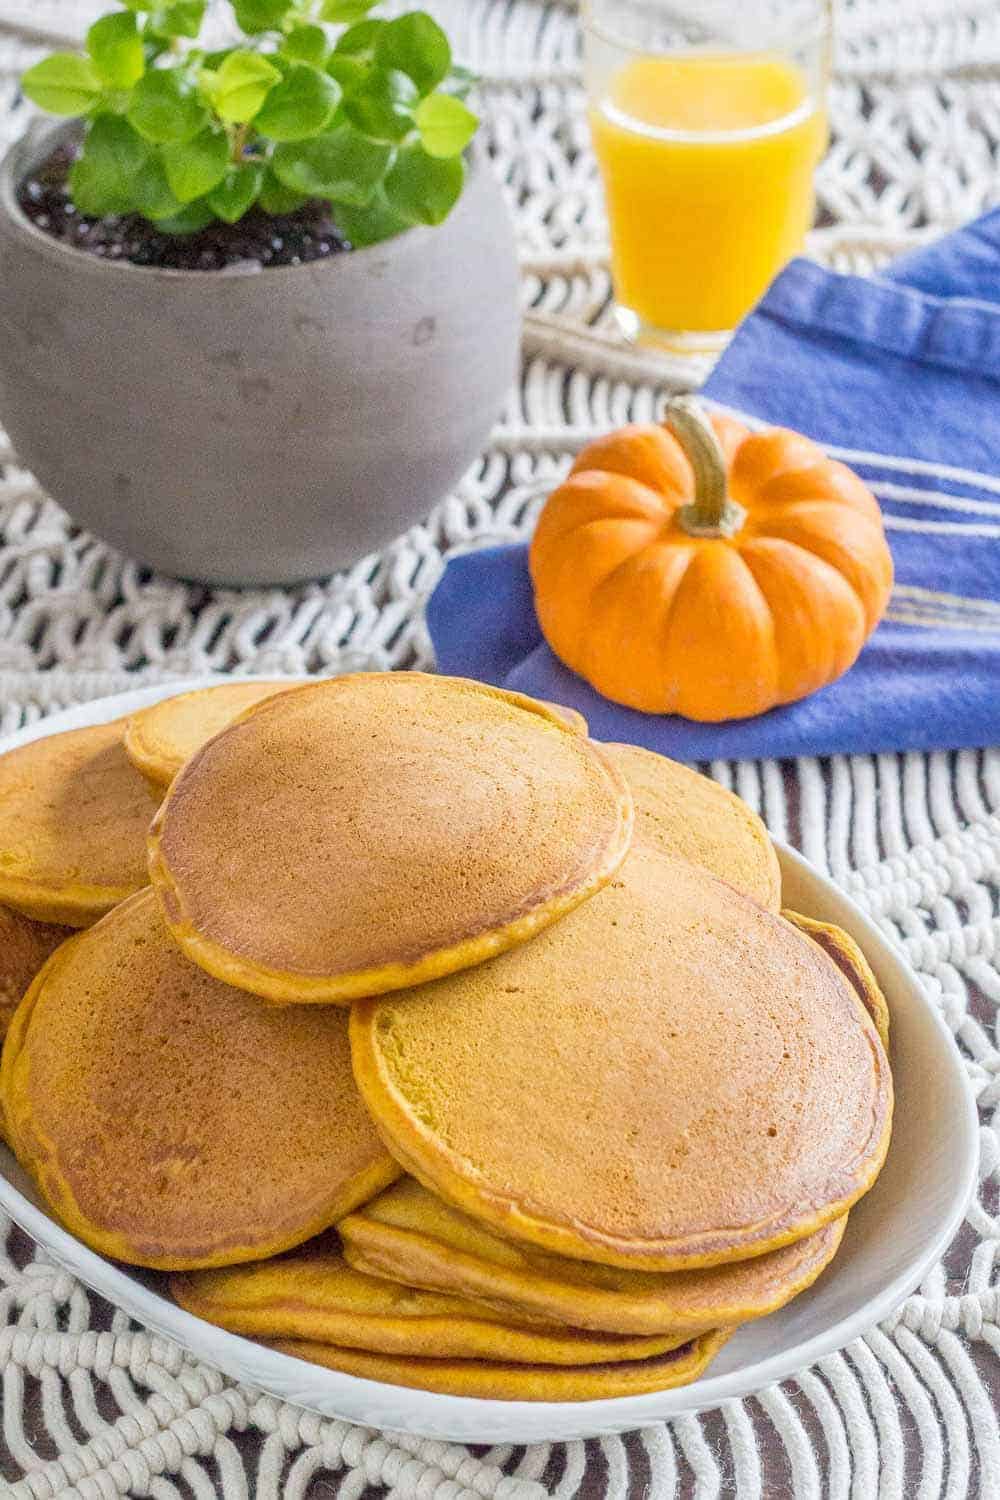 Pumpkin pancakes are the best breakfast for fall! Warming spices and pumpkin make these a great family brunch before hitting the pumpkin patch.